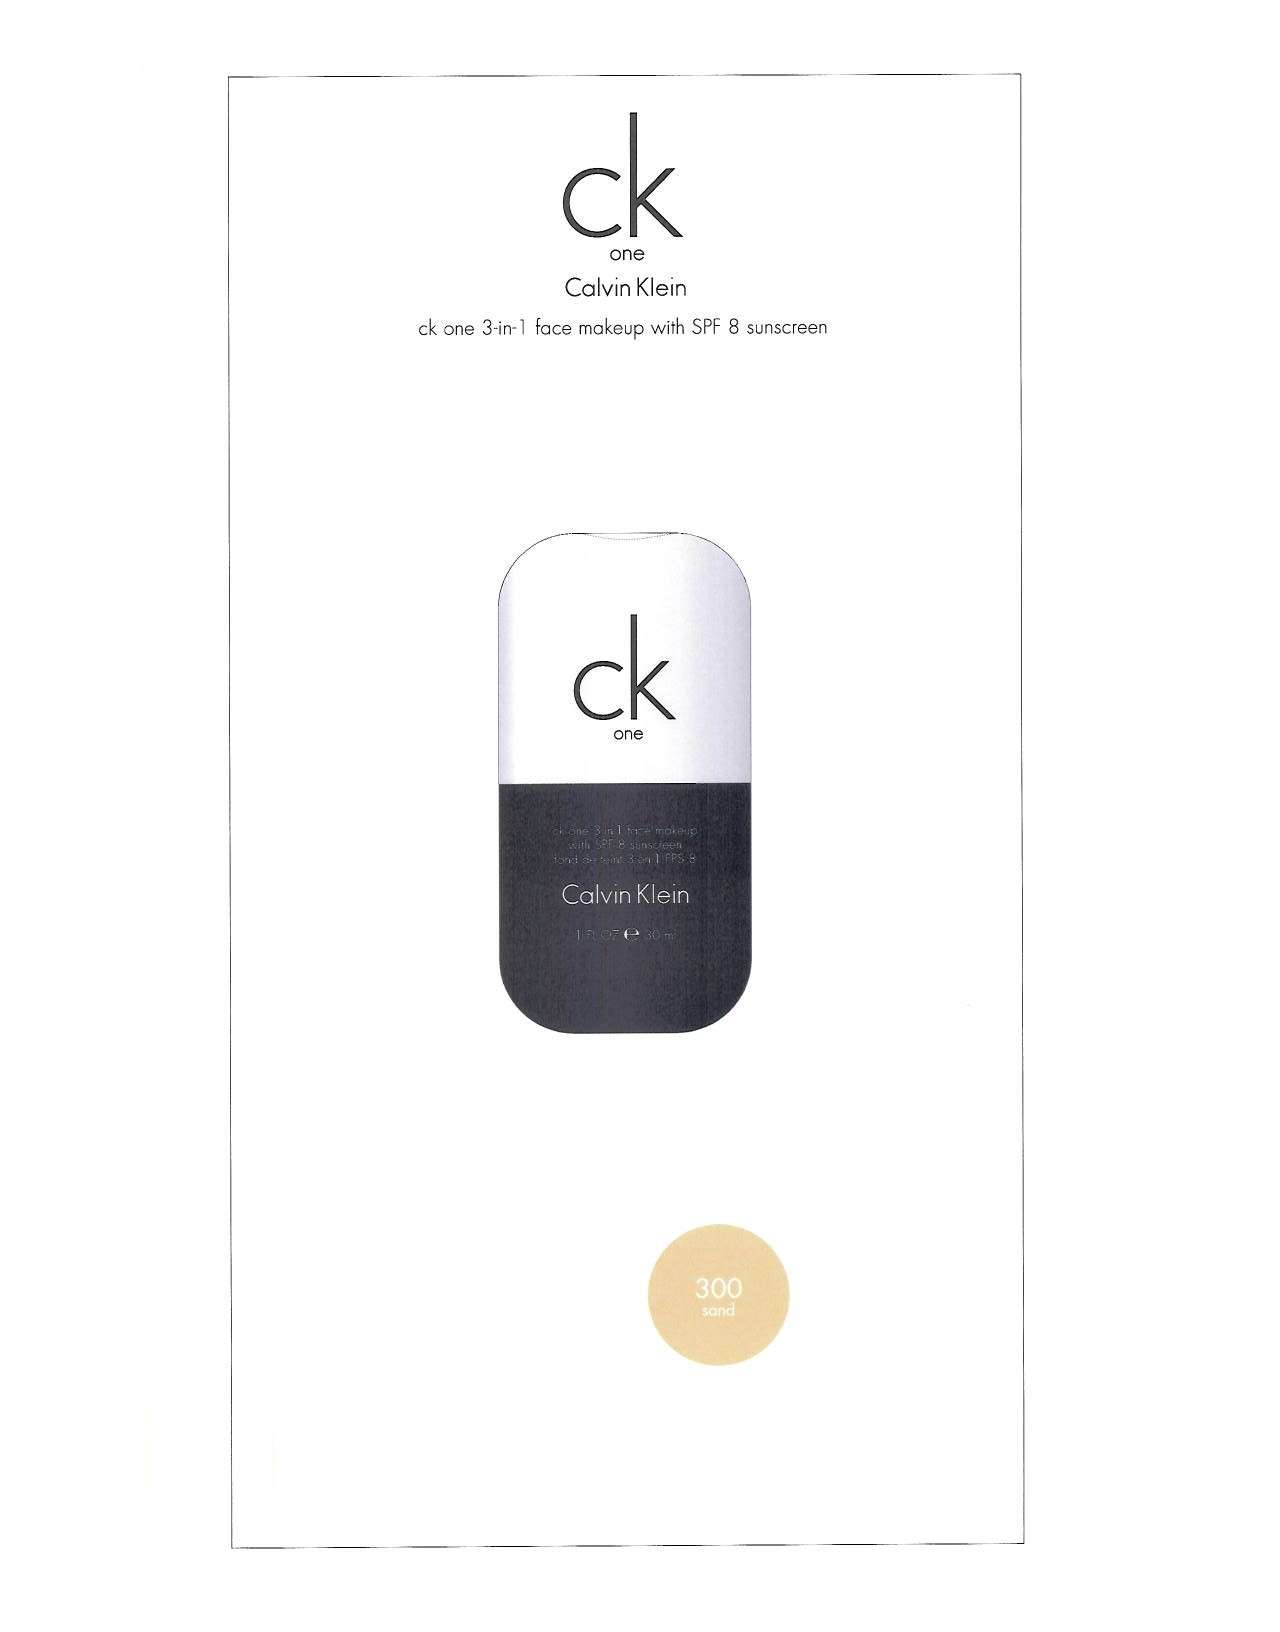 ck one 3-in-1 face makeup